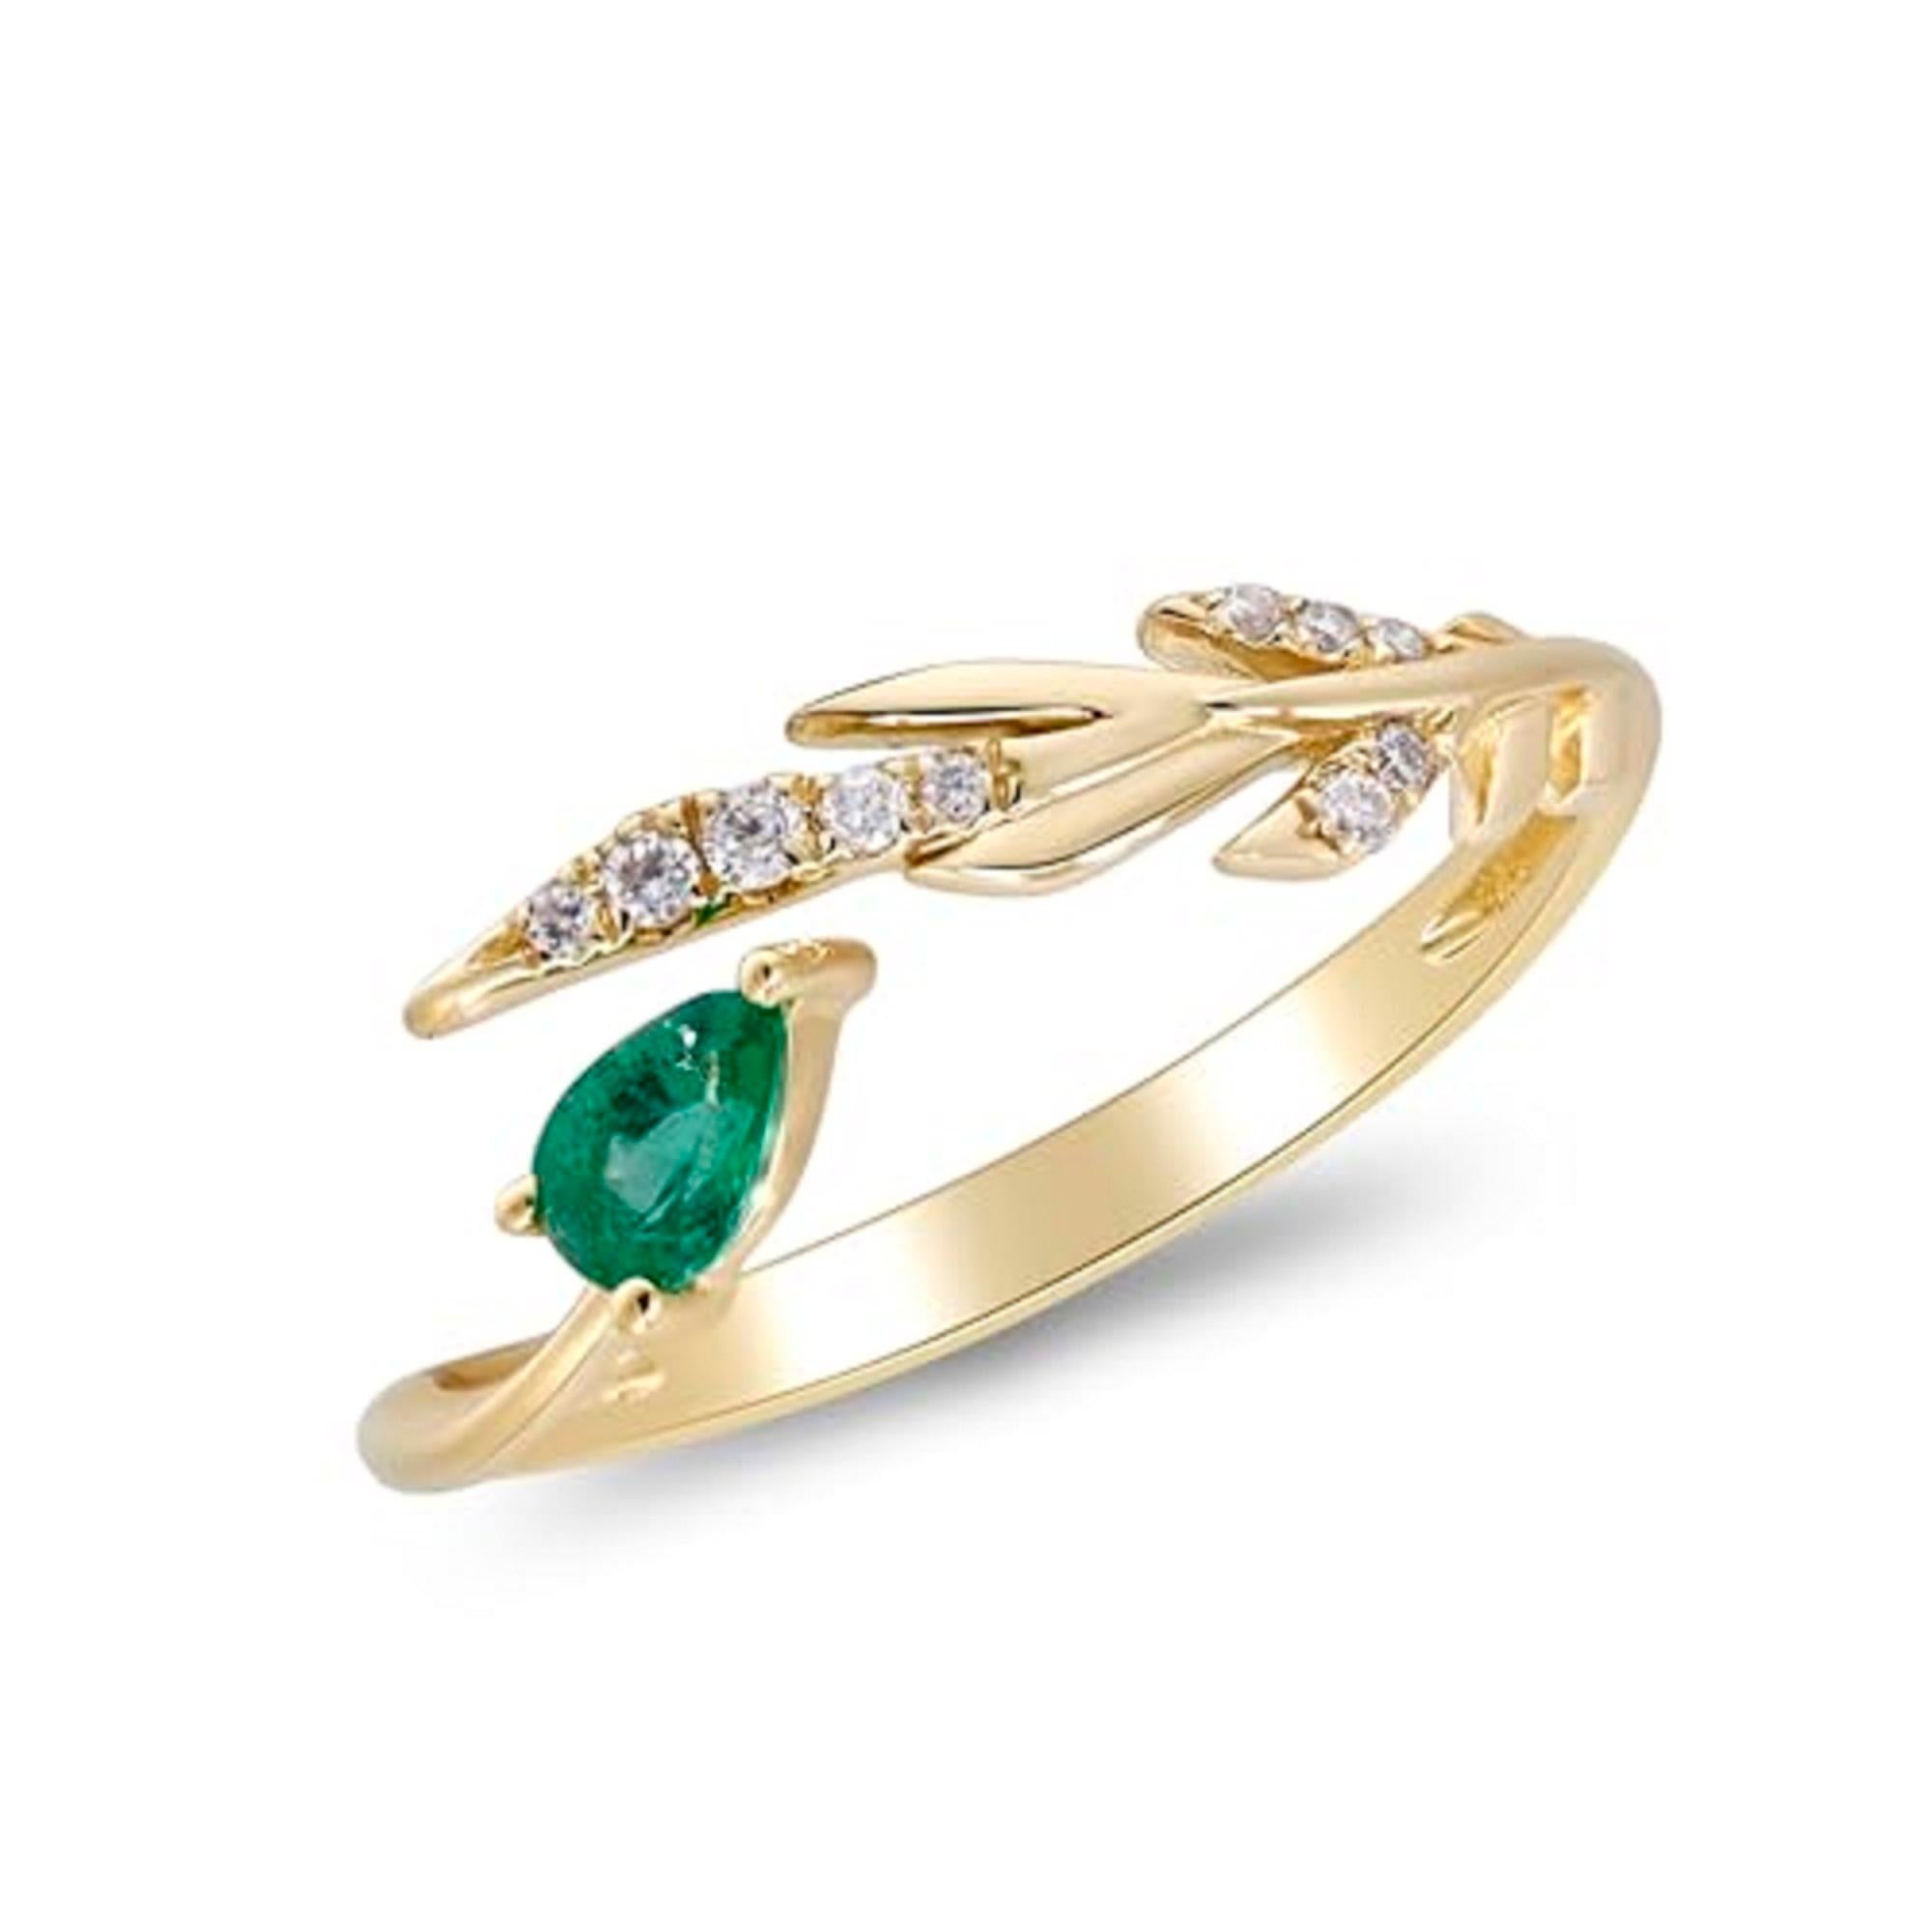 Decorate yourself in elegance with this Ring is crafted from 14-karat Yellow gold 3X5 Pear-Cut Emerald (1 pcs) 0.19 carat and Round-cut White Diamond (10 Pcs) 0.05 Carat. This Ring is weight 1.53 grams. This delicate Ring is polished to a high